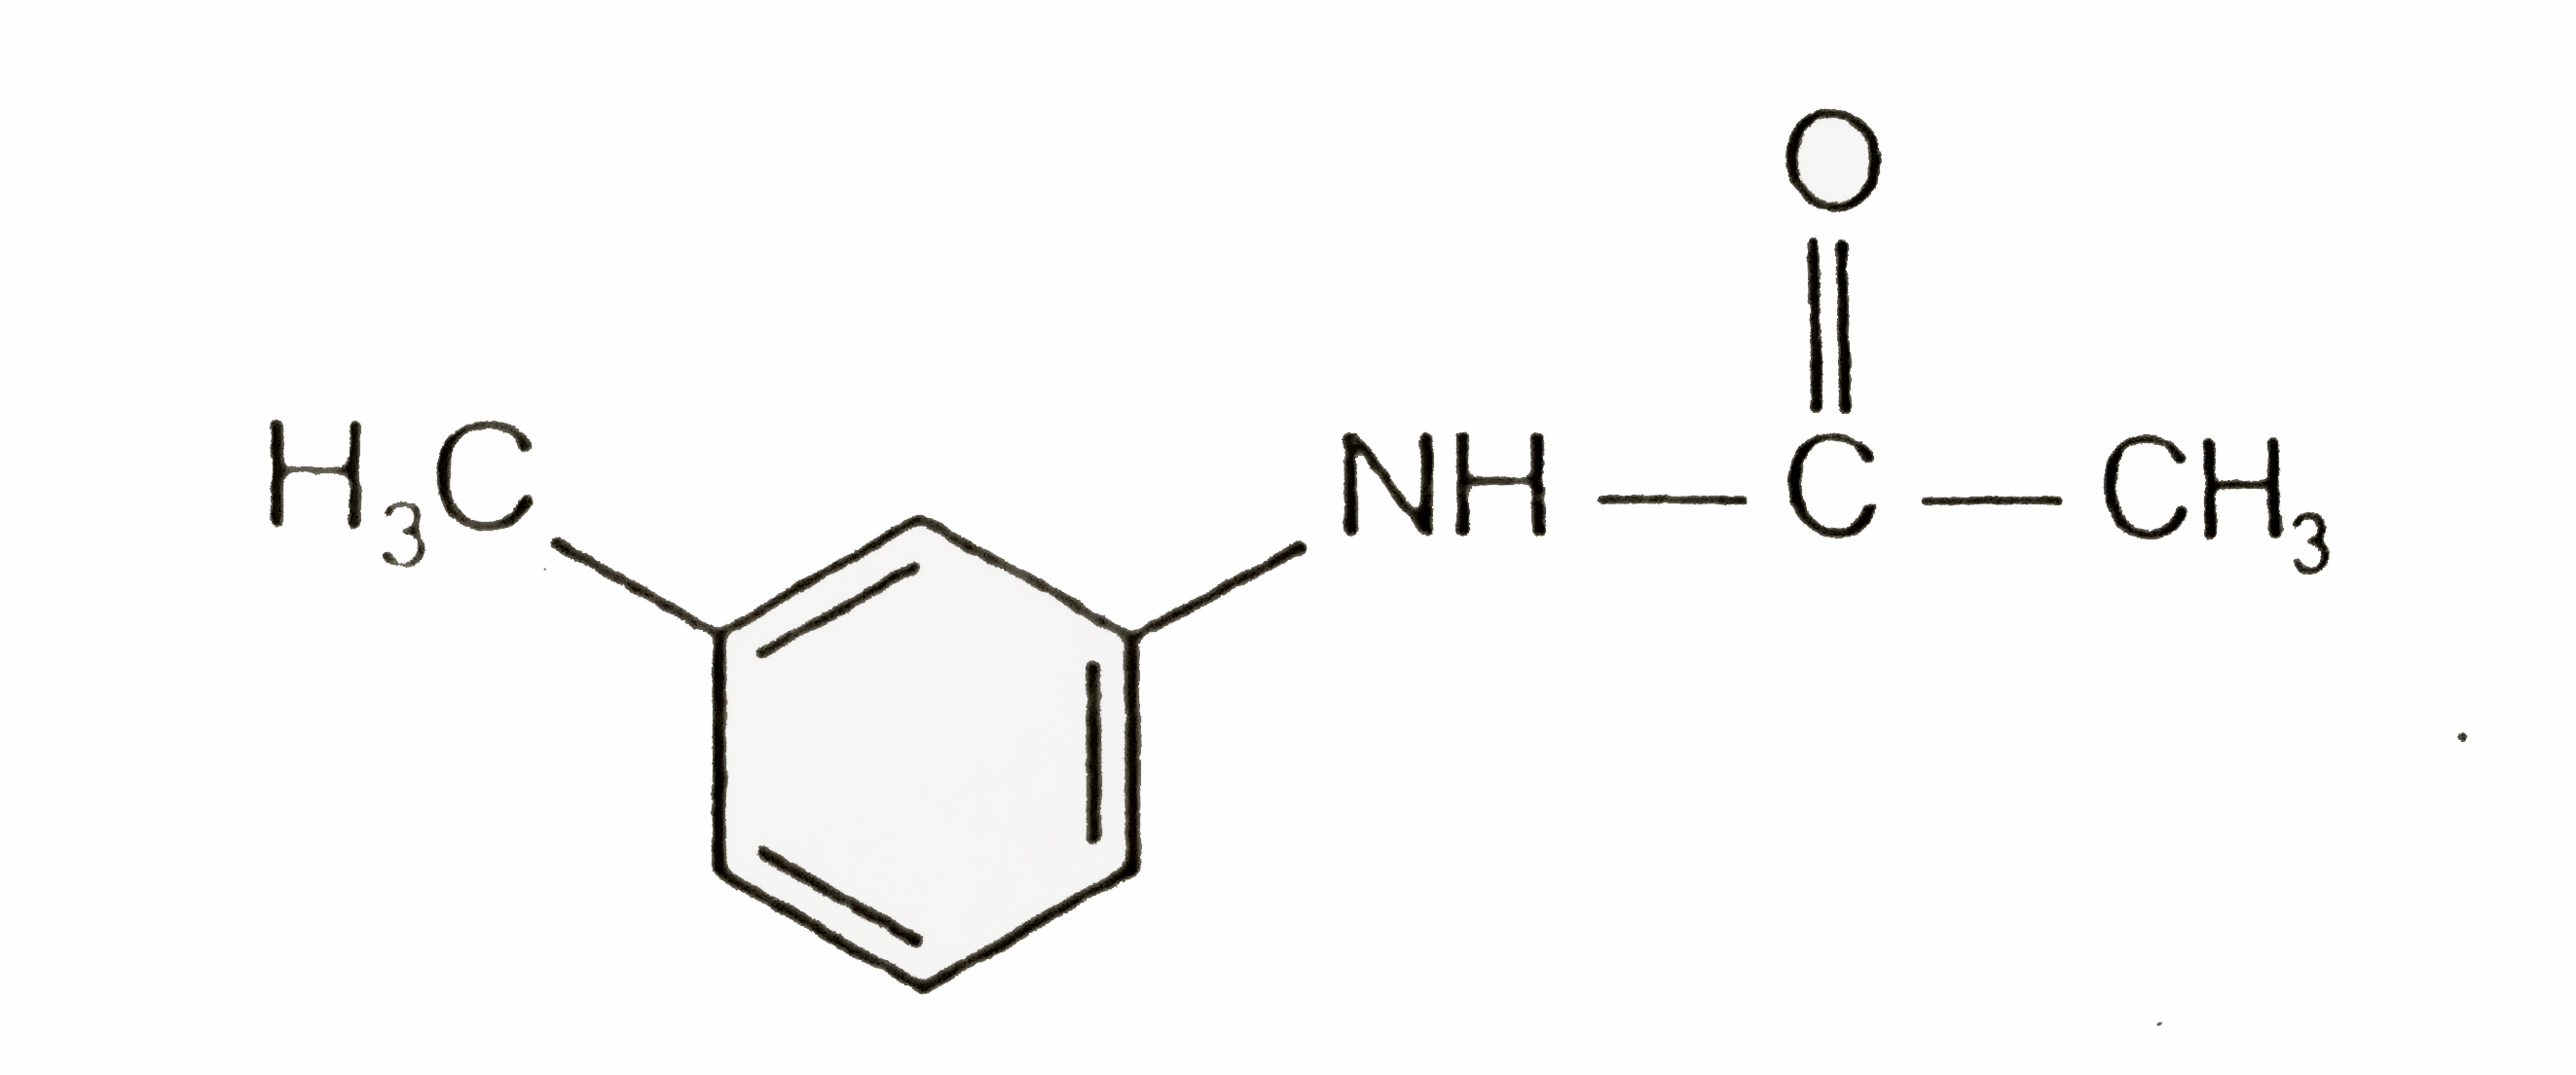 Outline the preparation of the following compounds from 3-methyl benzoic acid and any other reagents.